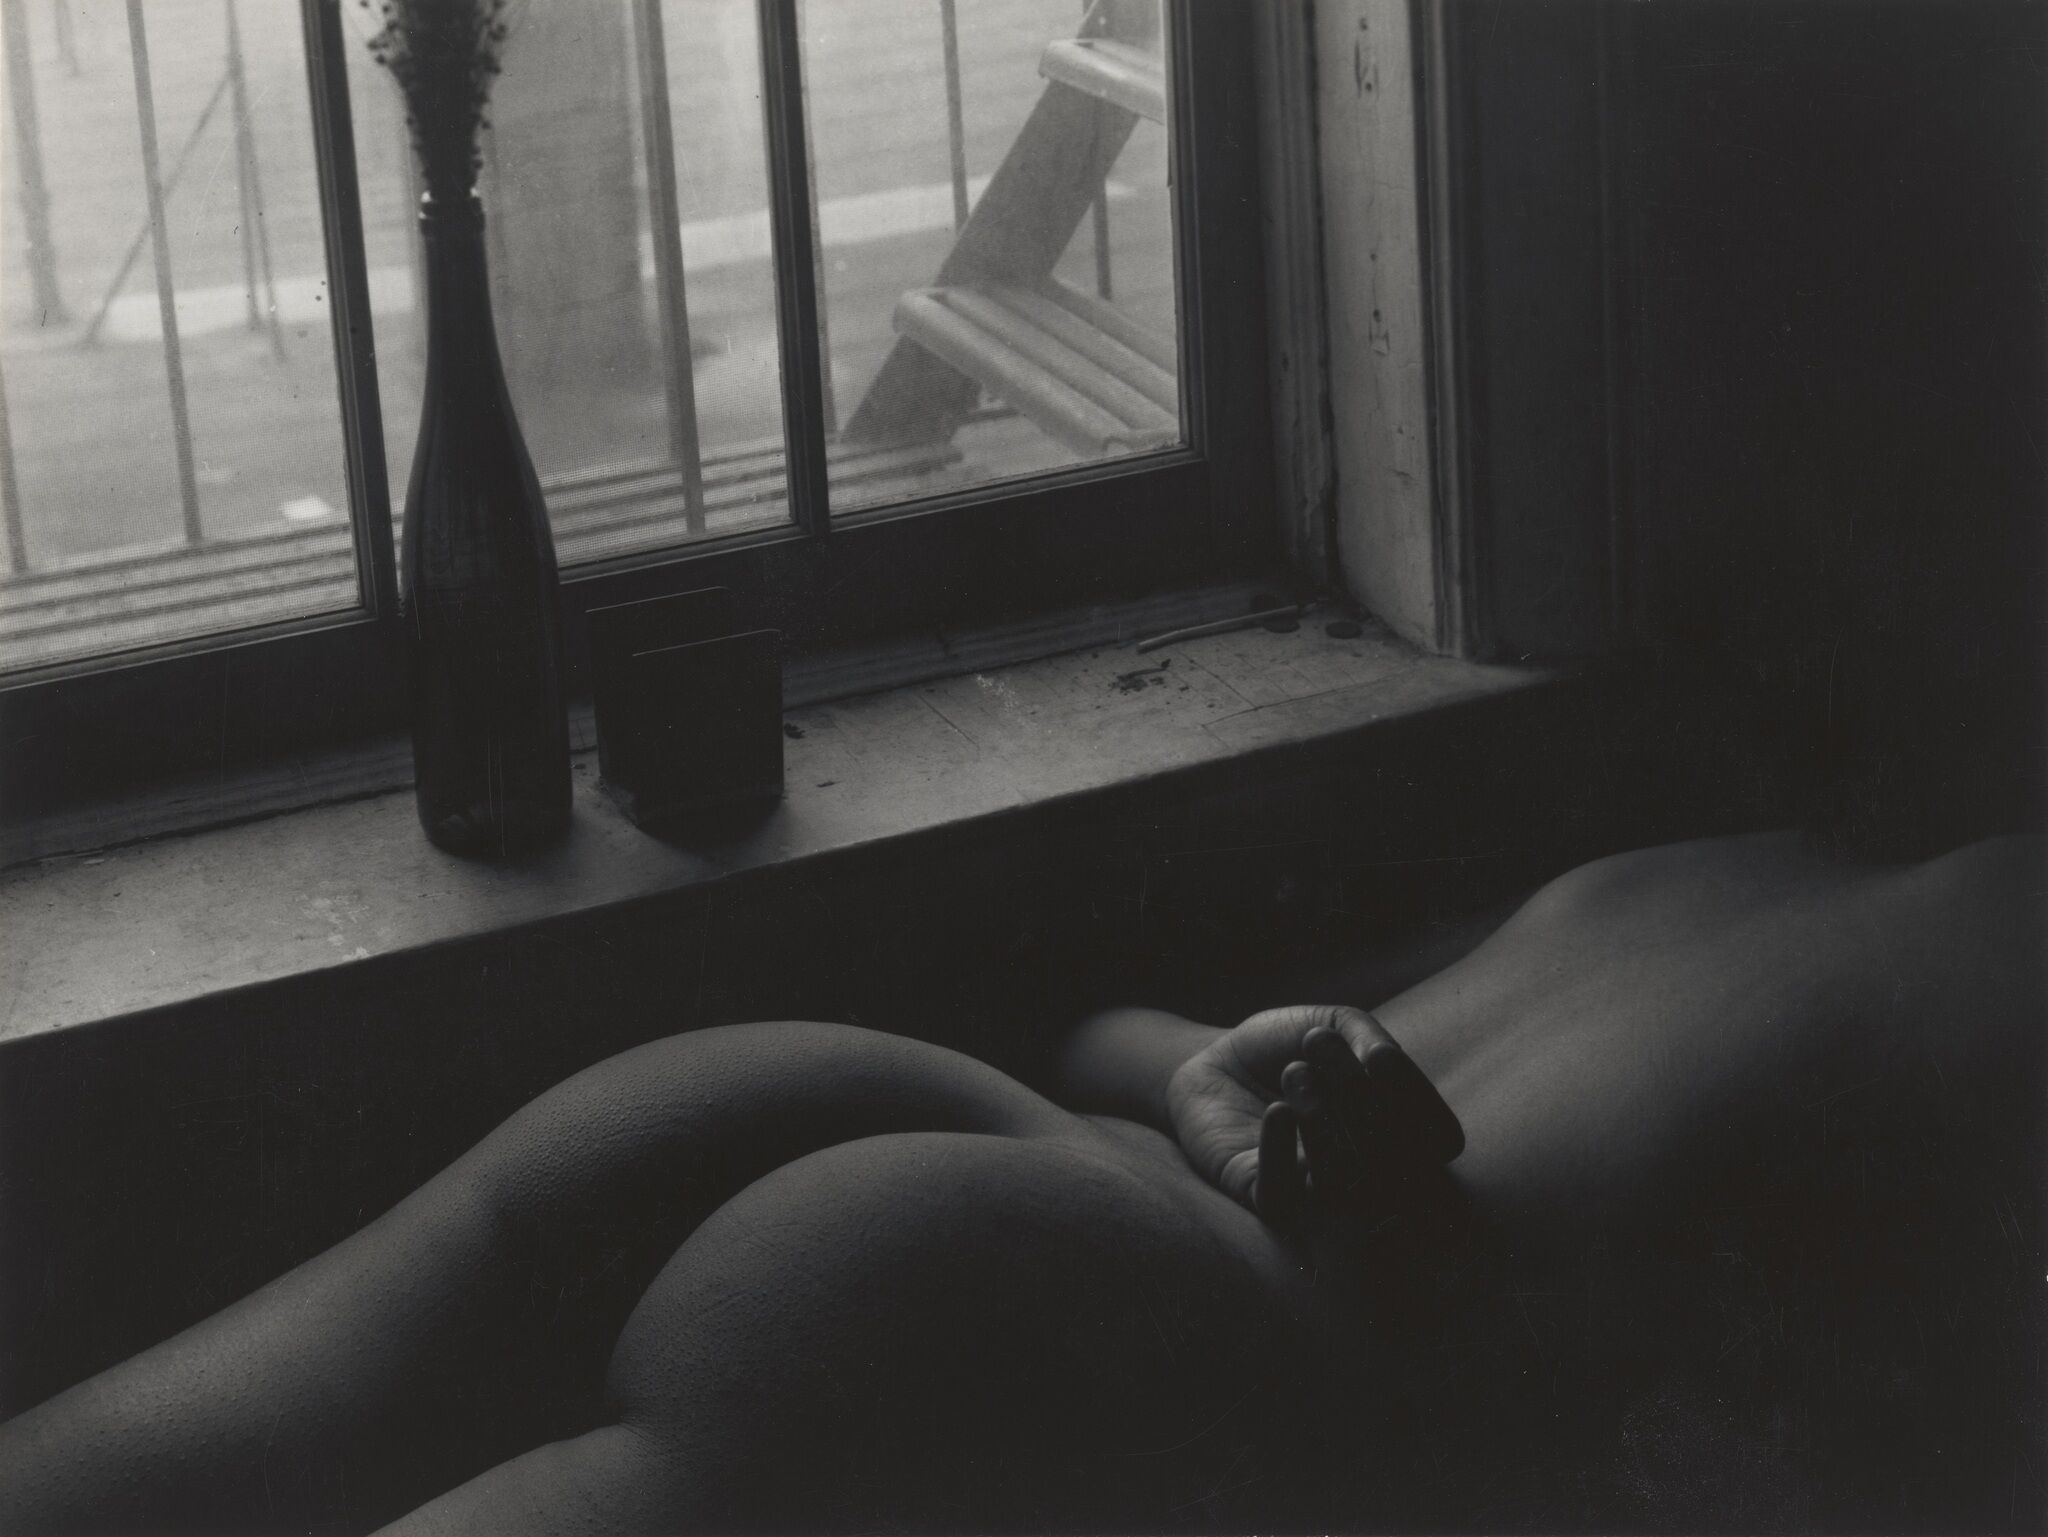 The backside of a nude person lying face down with their hand on their back, next to a window.